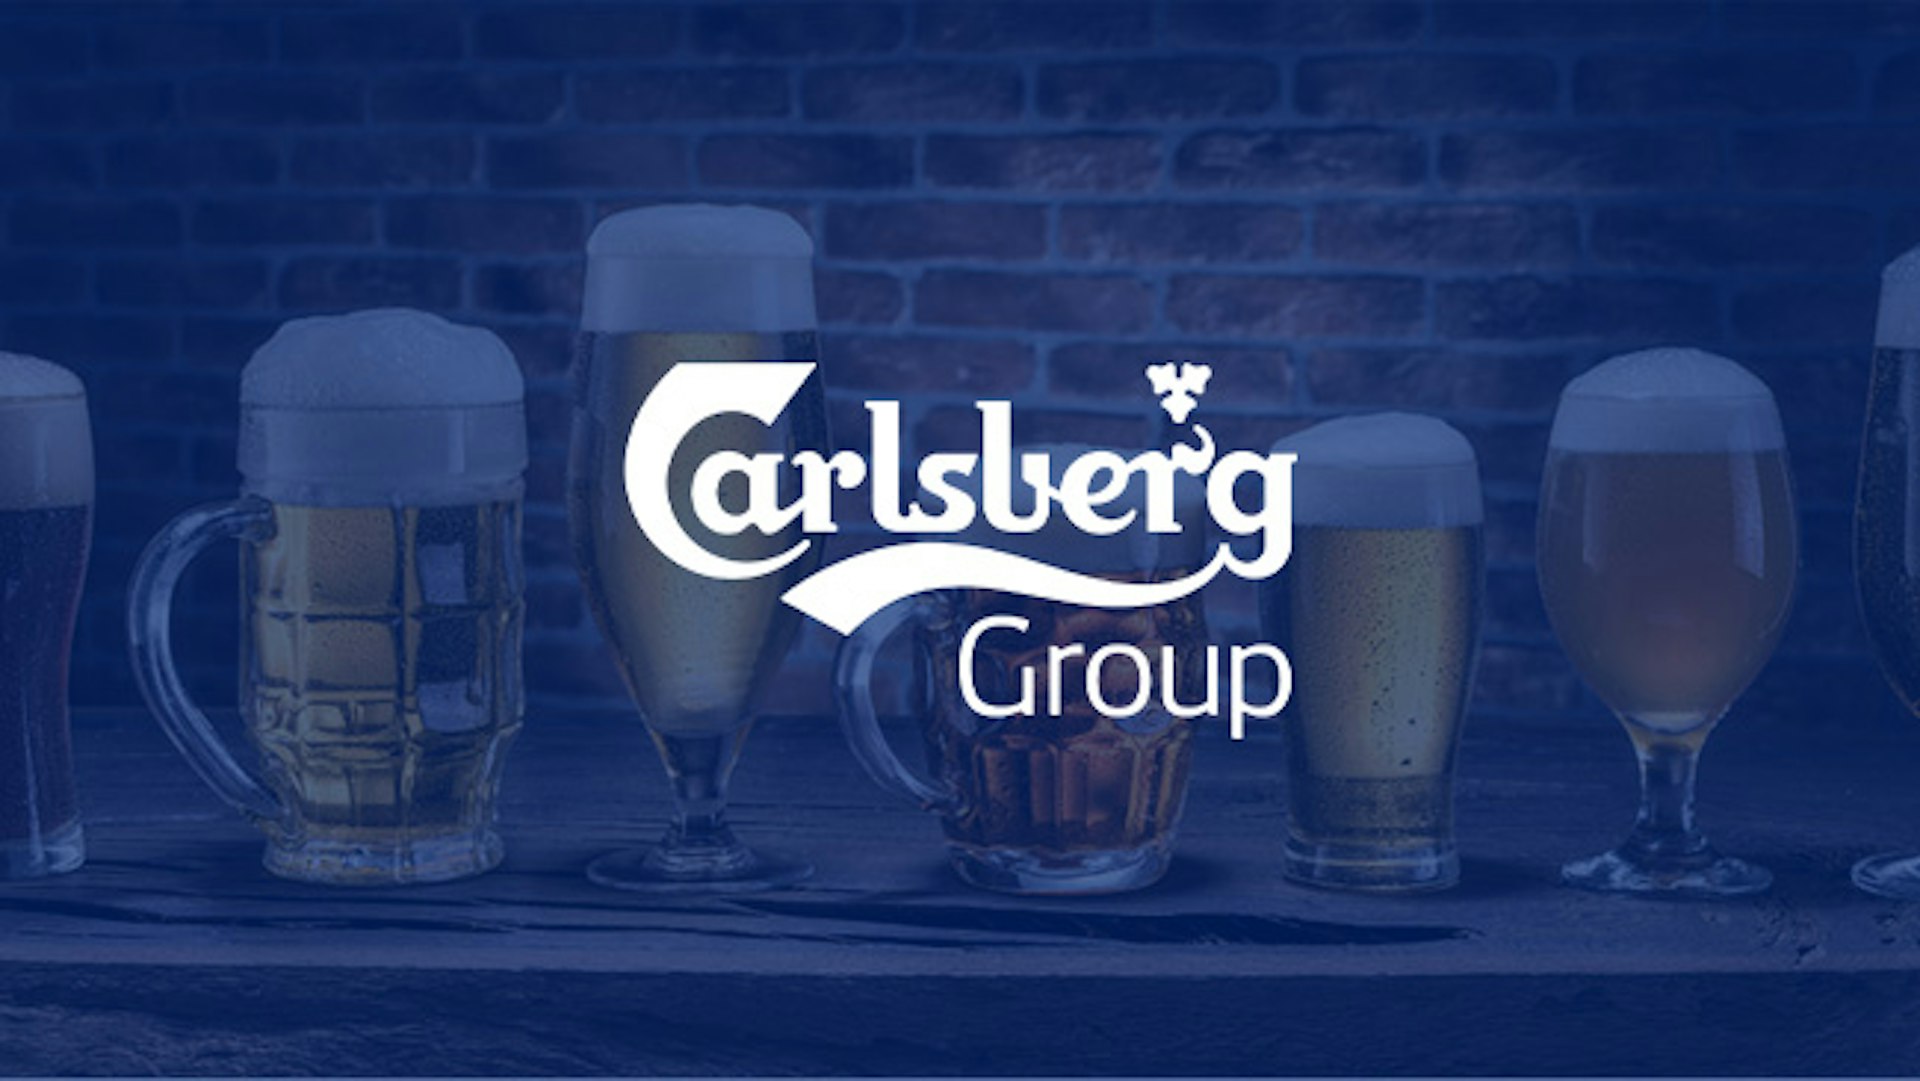 Carlsberg Group Achieves Digital Transformation with the Zscaler Zero Trust Exchange